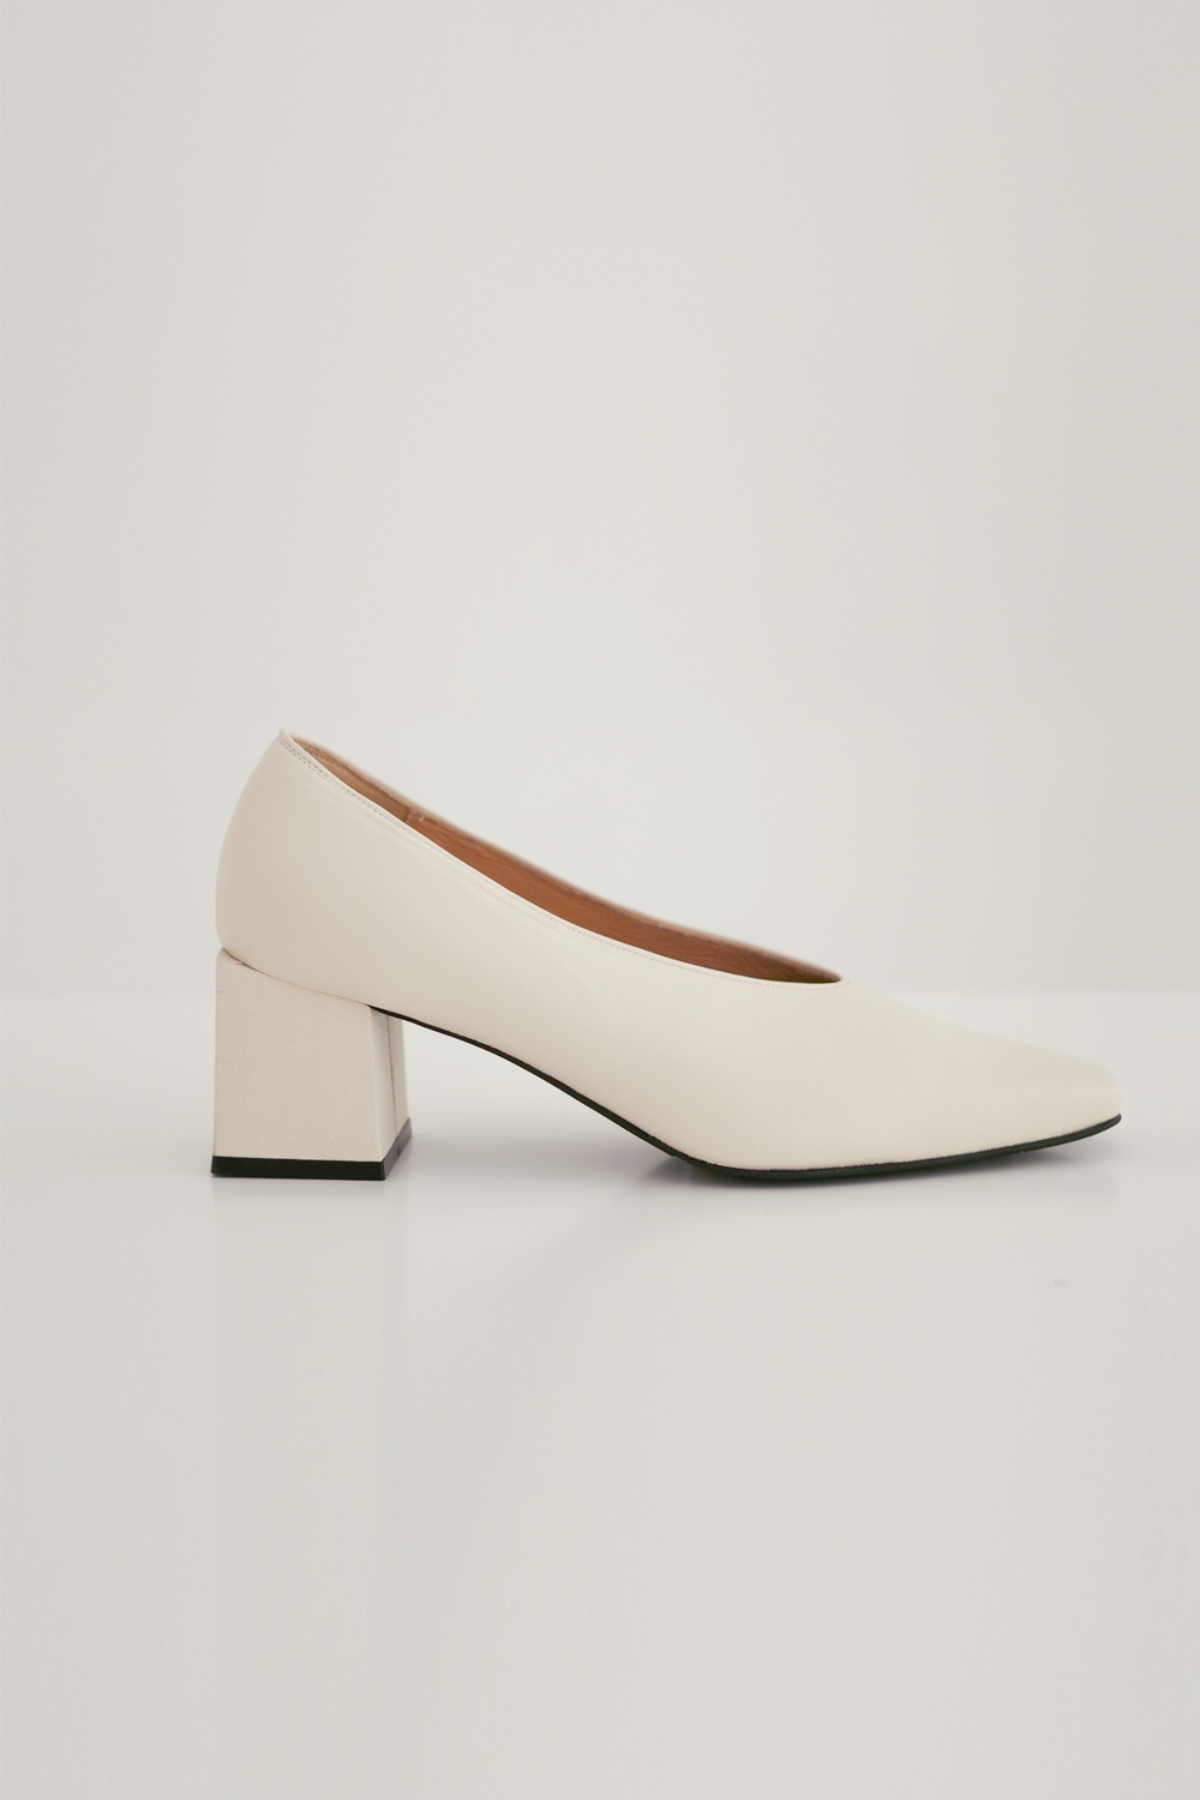 ANTHÈSE venica square middle heel, ivory